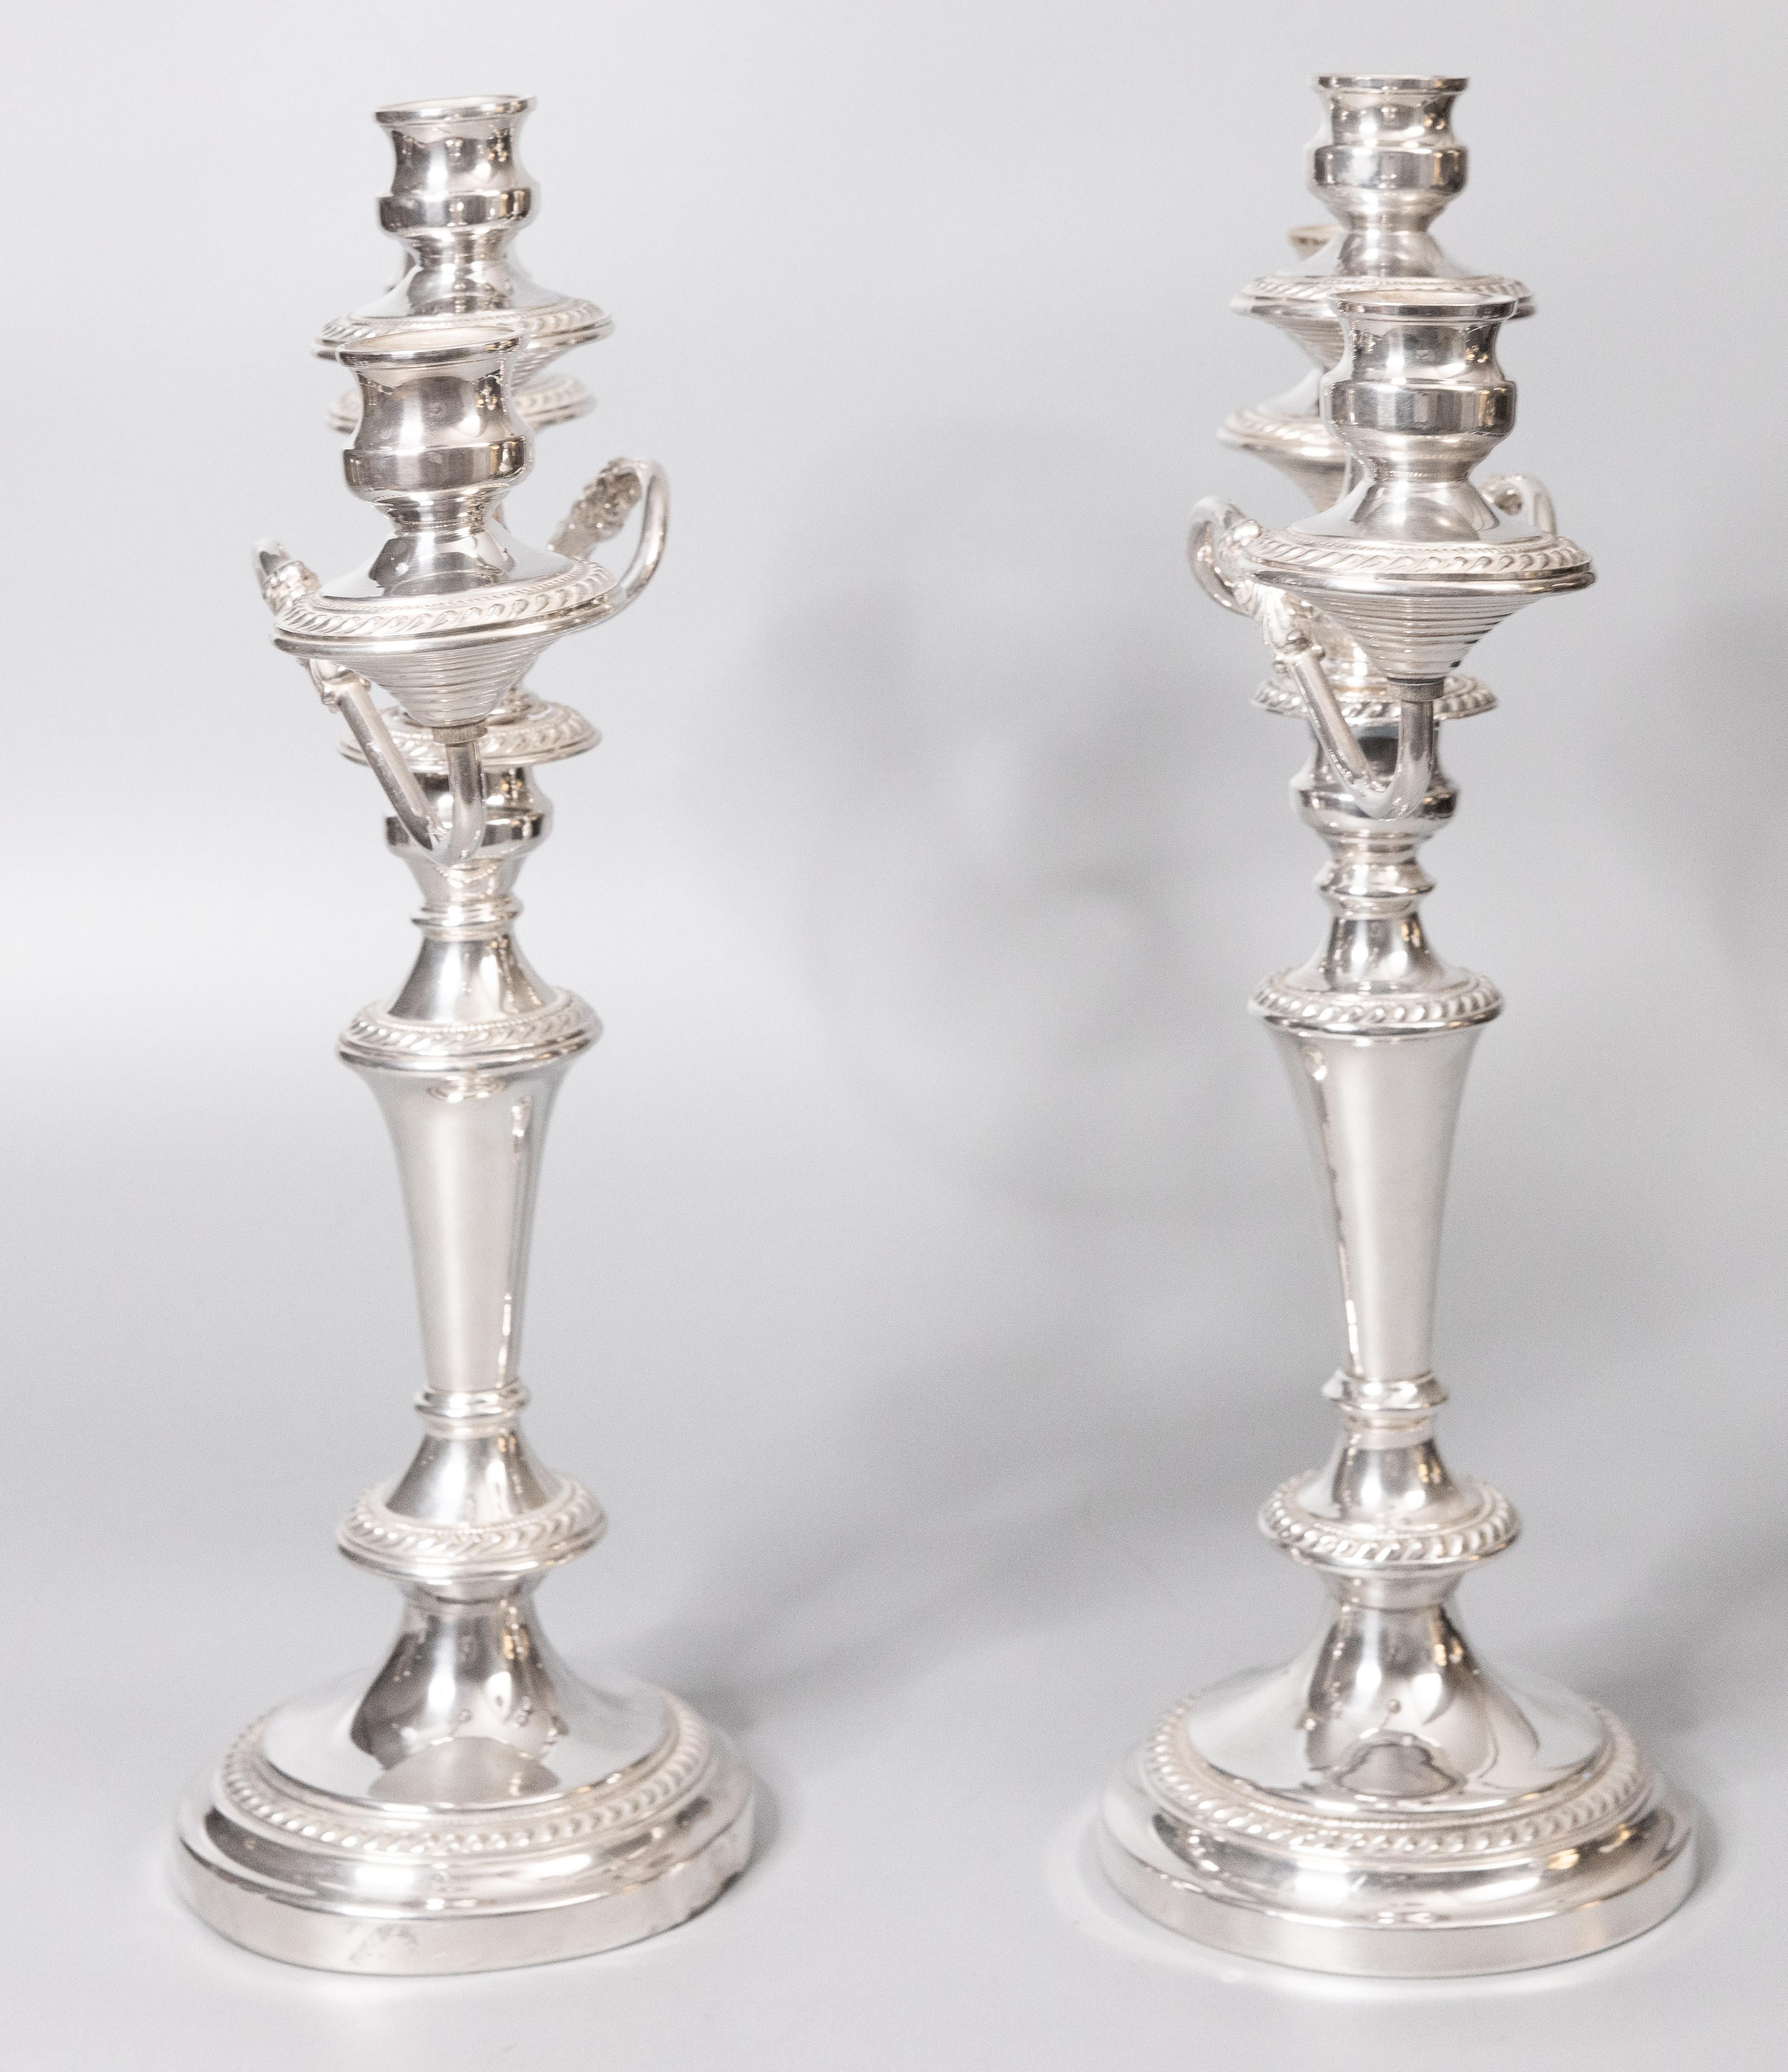 20th Century Pair of Antique English Silver Plate Convertible Candelabras Candlesticks